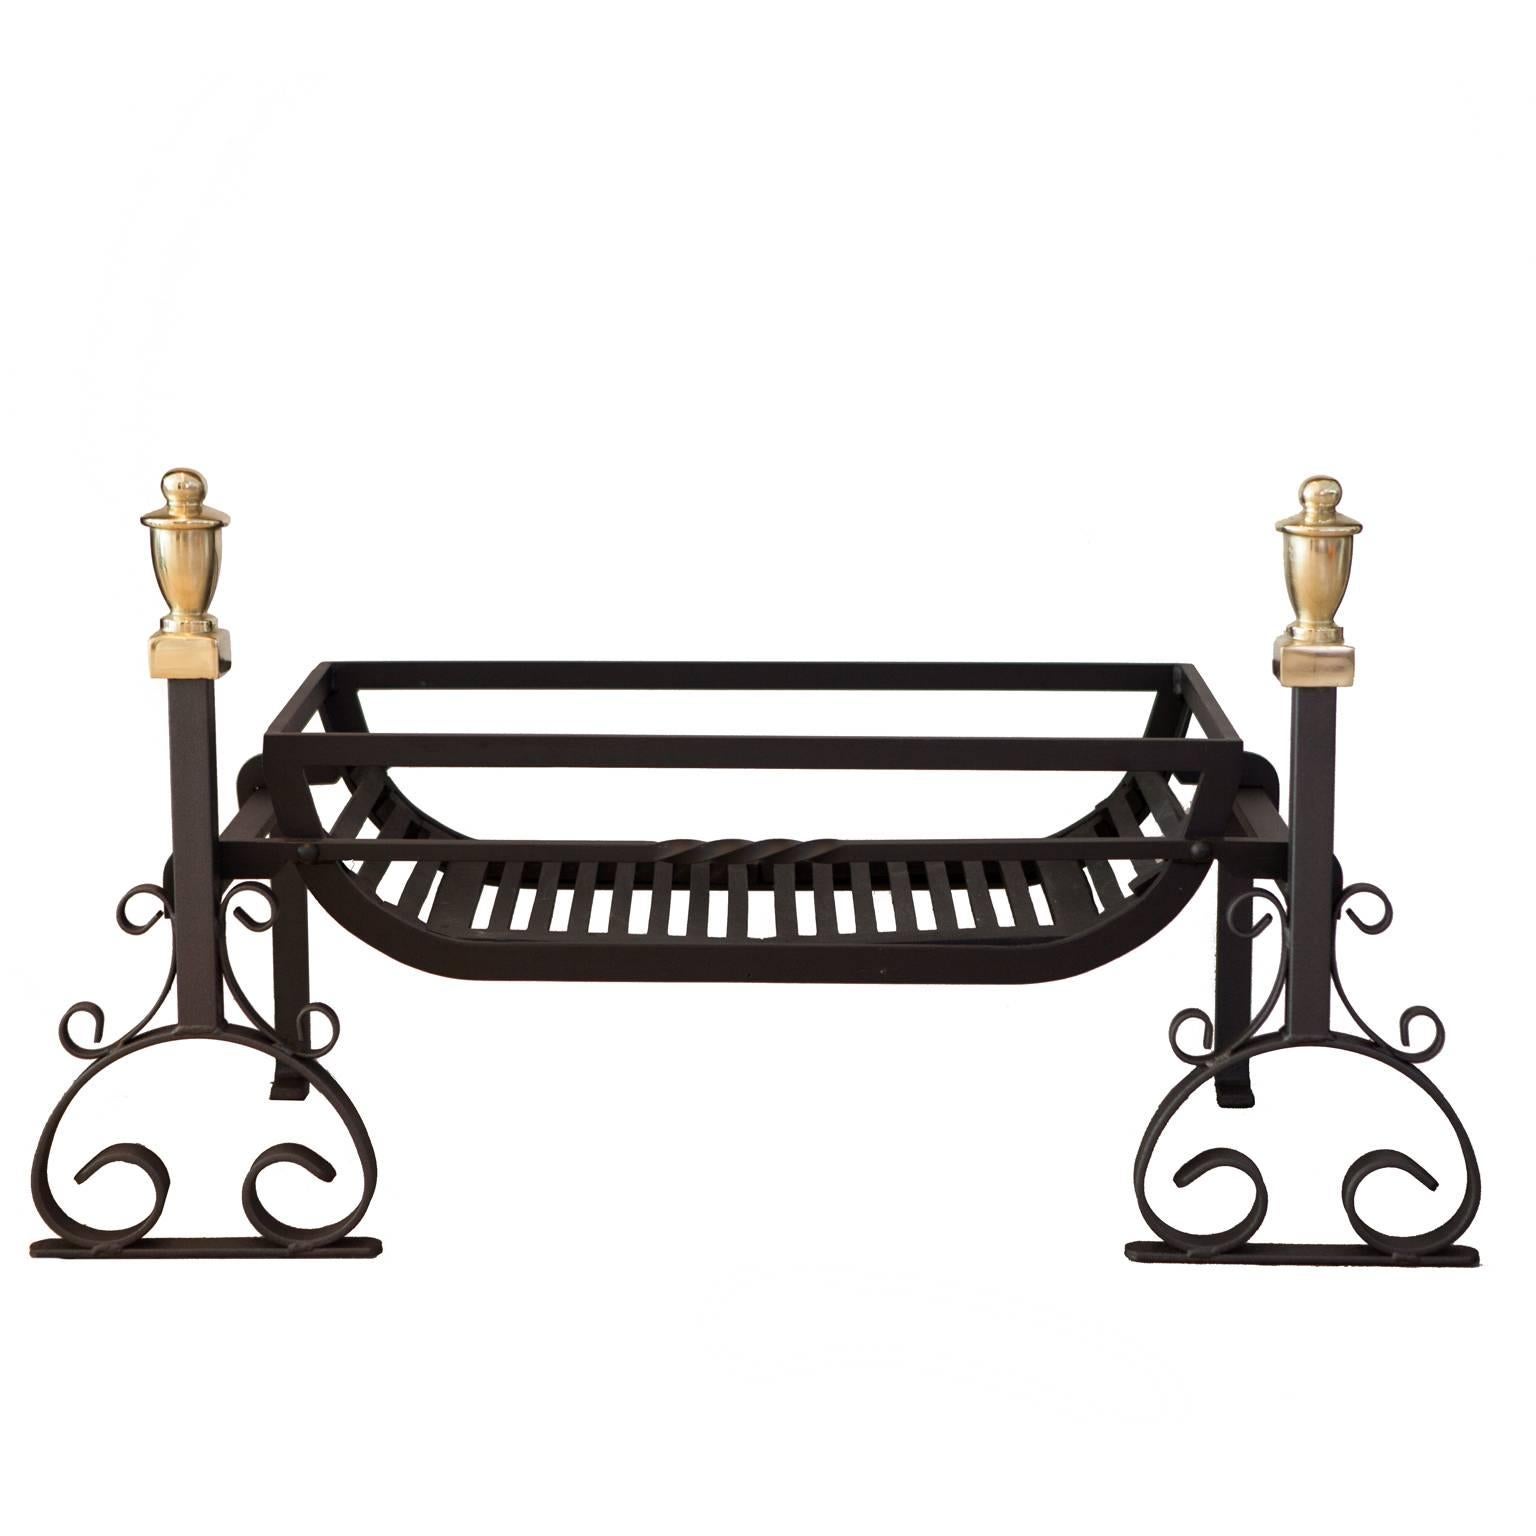 English 19th Century Cast Iron And Brass Fire Dogs or Andirons For Sale